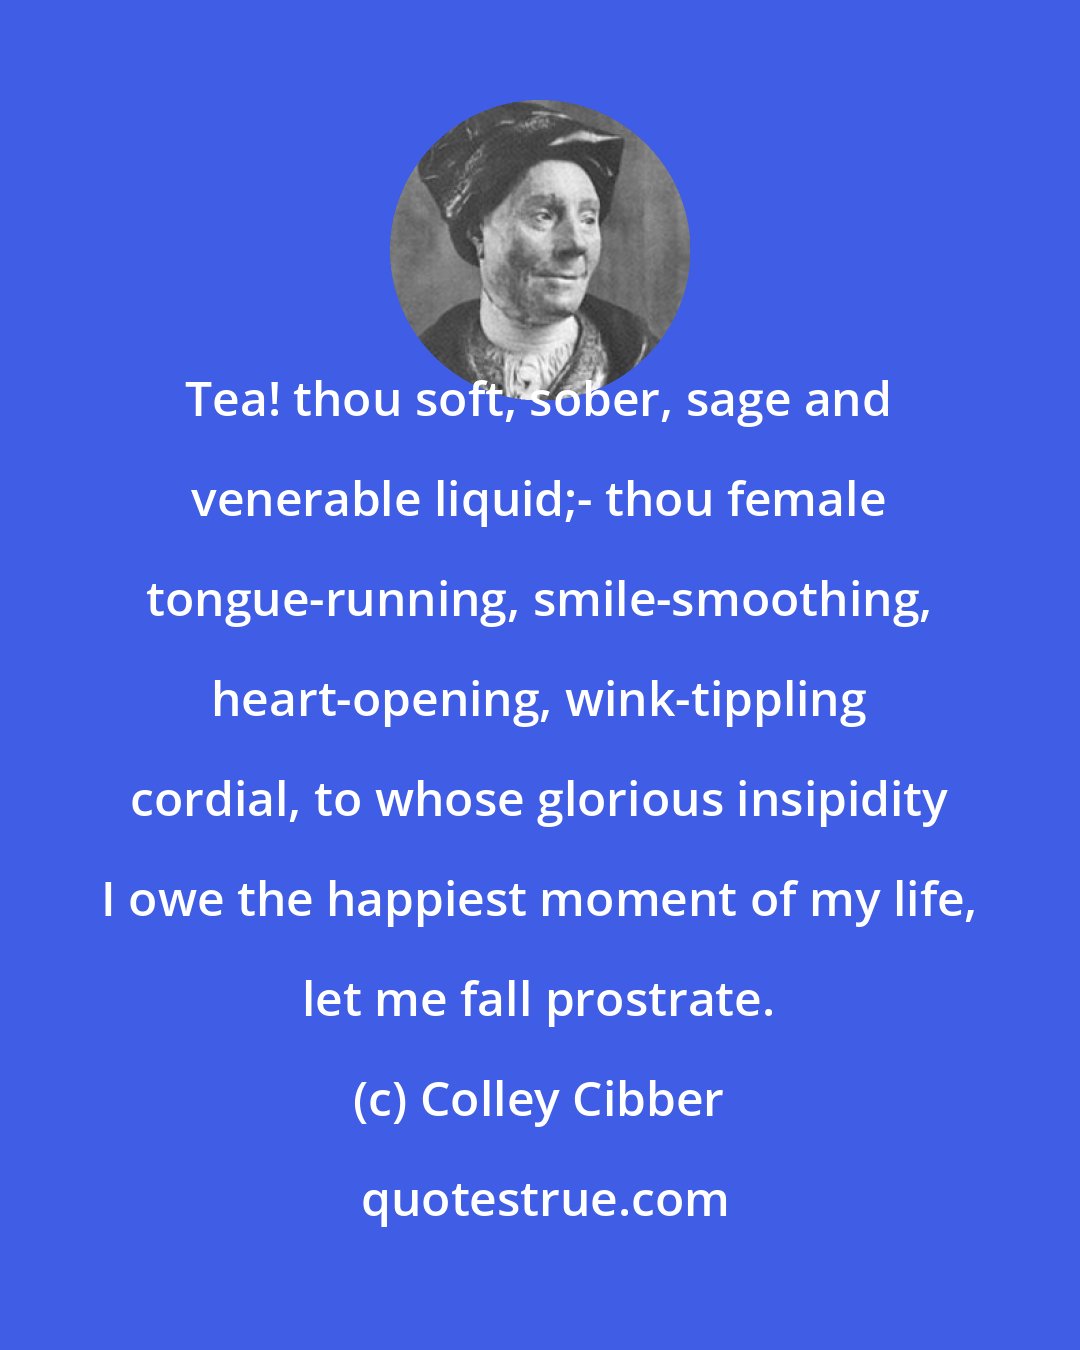 Colley Cibber: Tea! thou soft, sober, sage and venerable liquid;- thou female tongue-running, smile-smoothing, heart-opening, wink-tippling cordial, to whose glorious insipidity I owe the happiest moment of my life, let me fall prostrate.